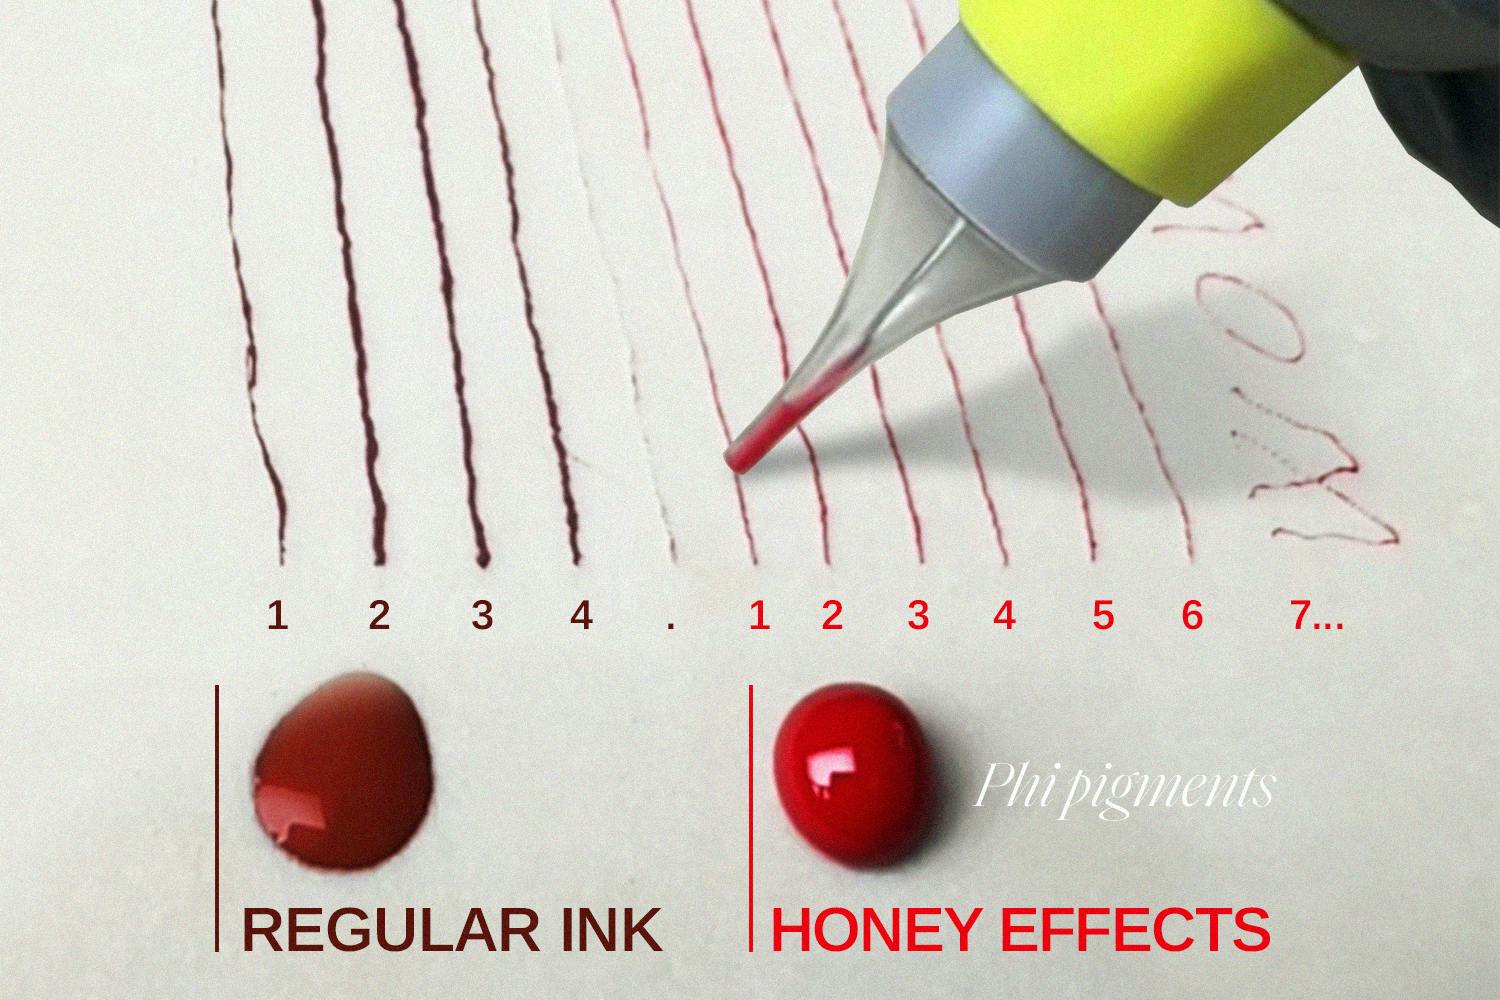 Spread and bleed: Regular inks tend to spread more, leading to a less-defined appearance.